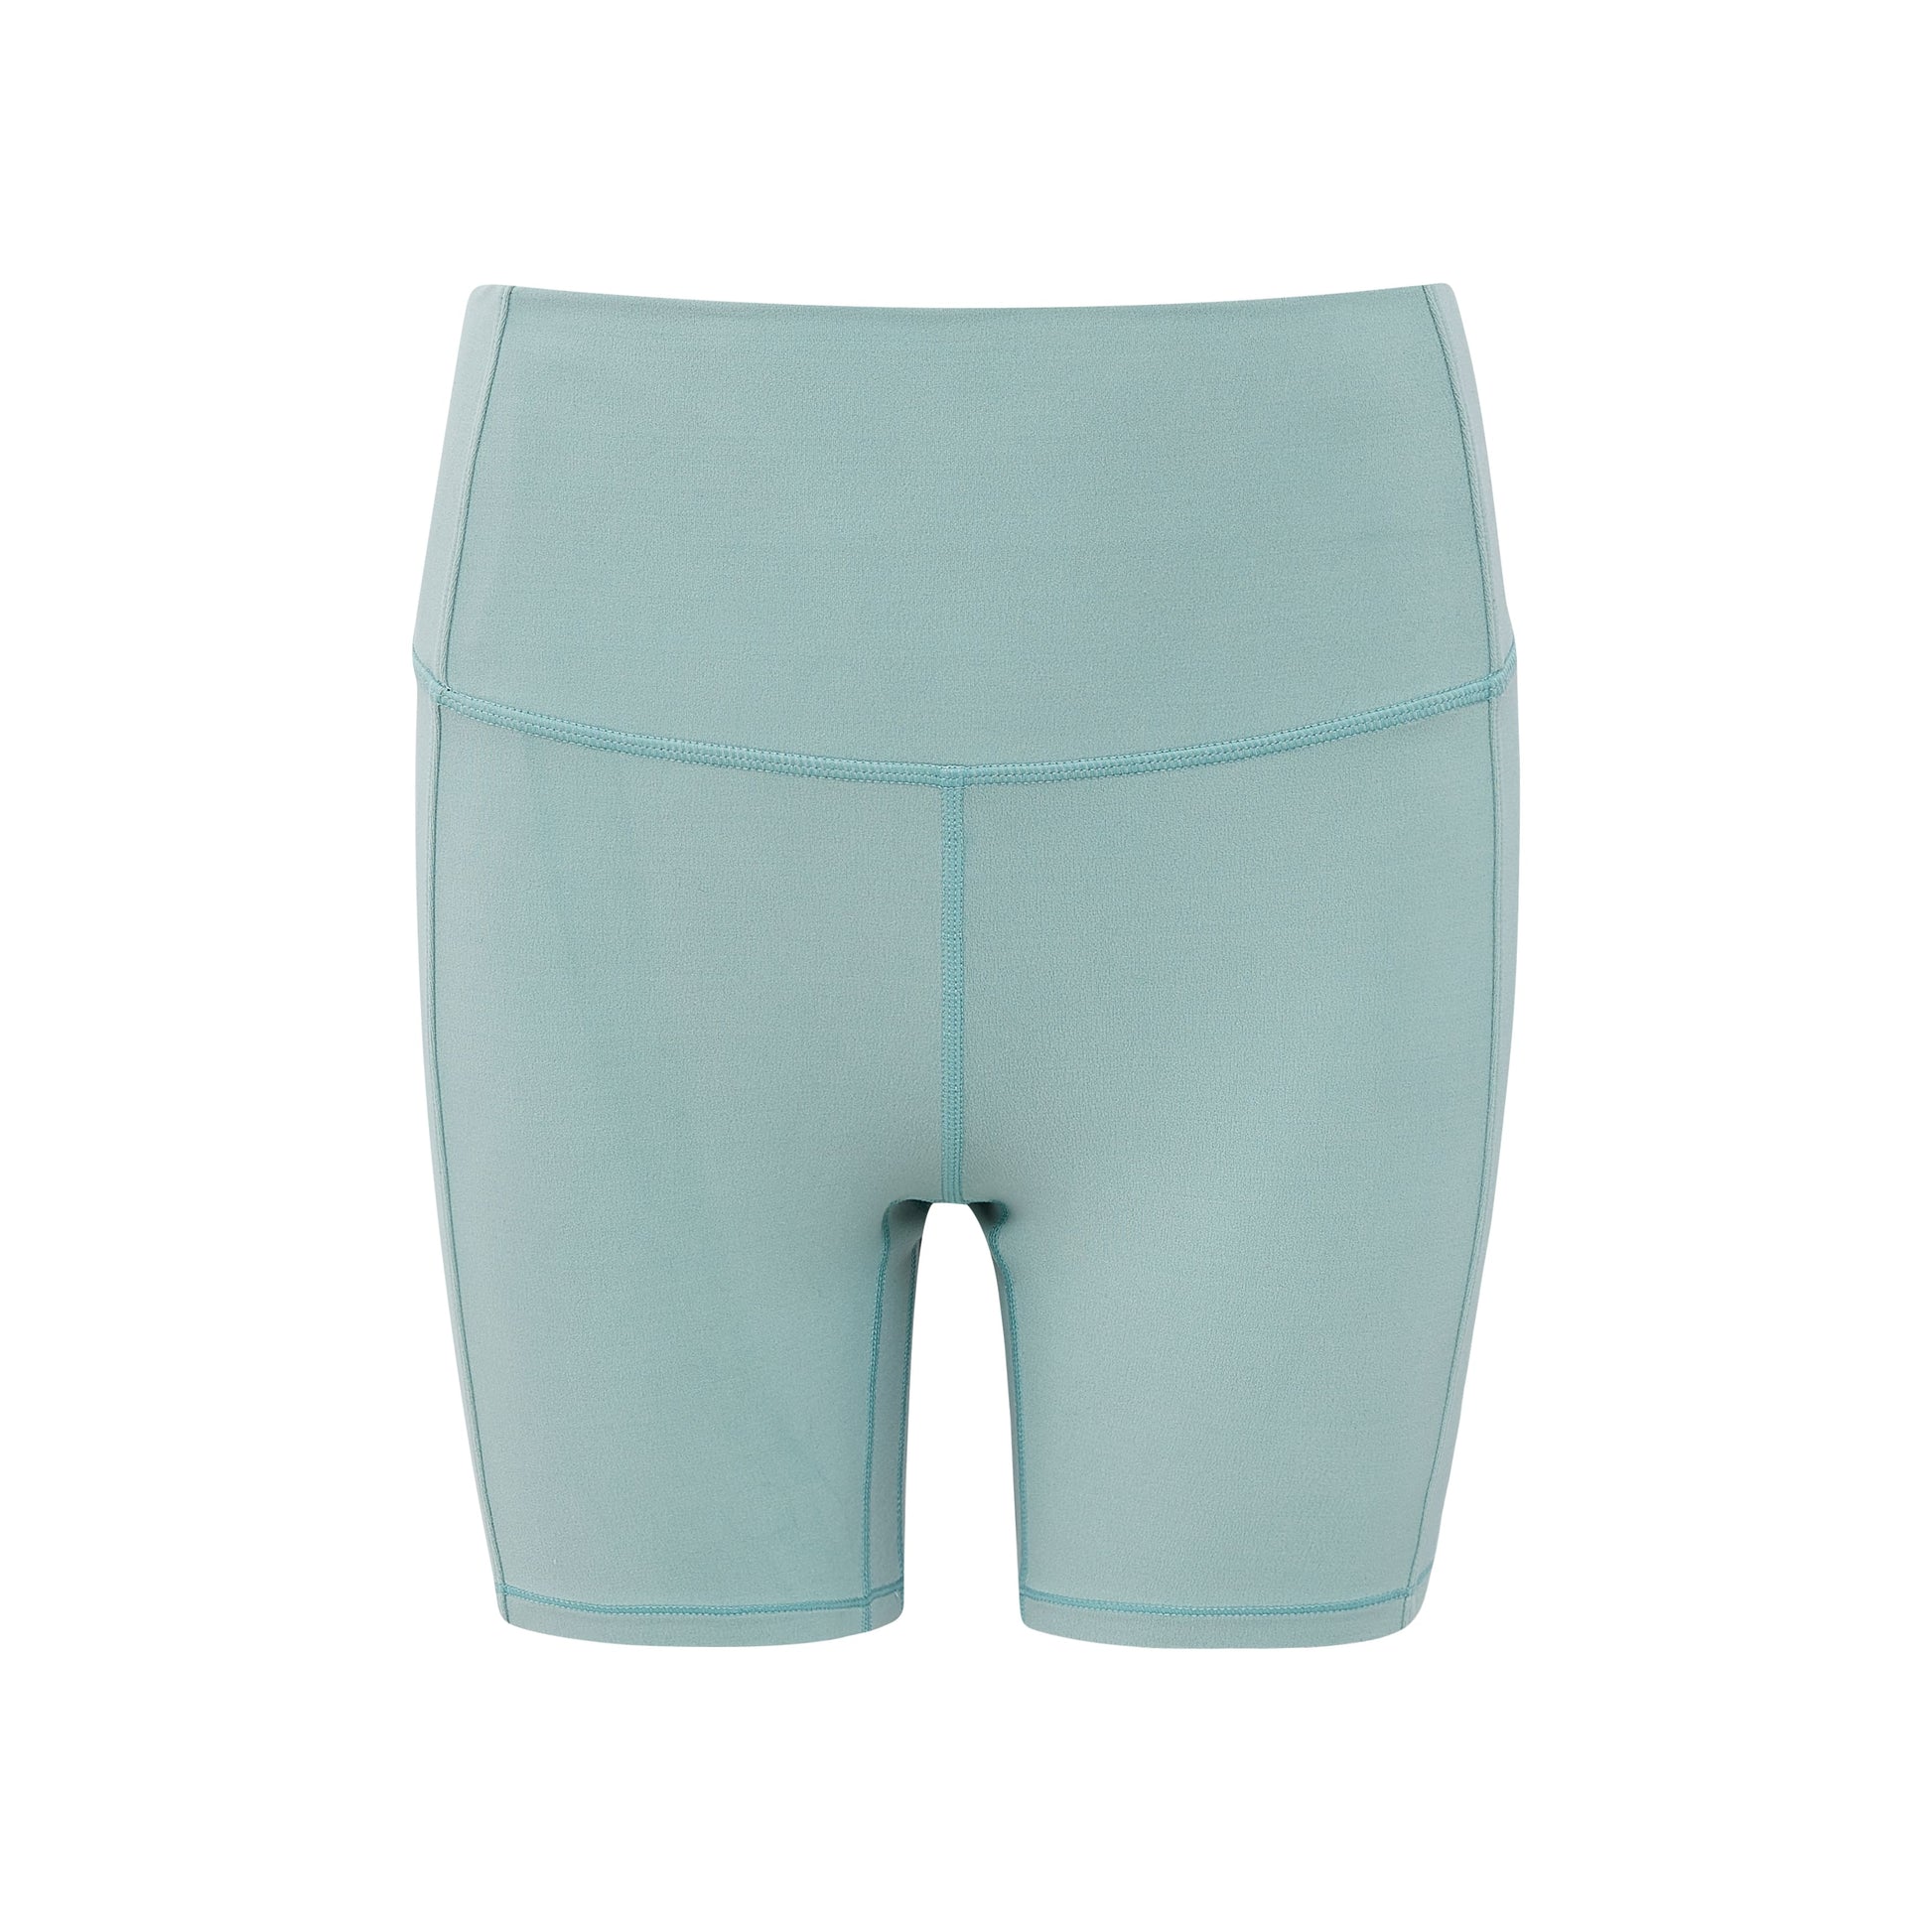 a teal sports shorts